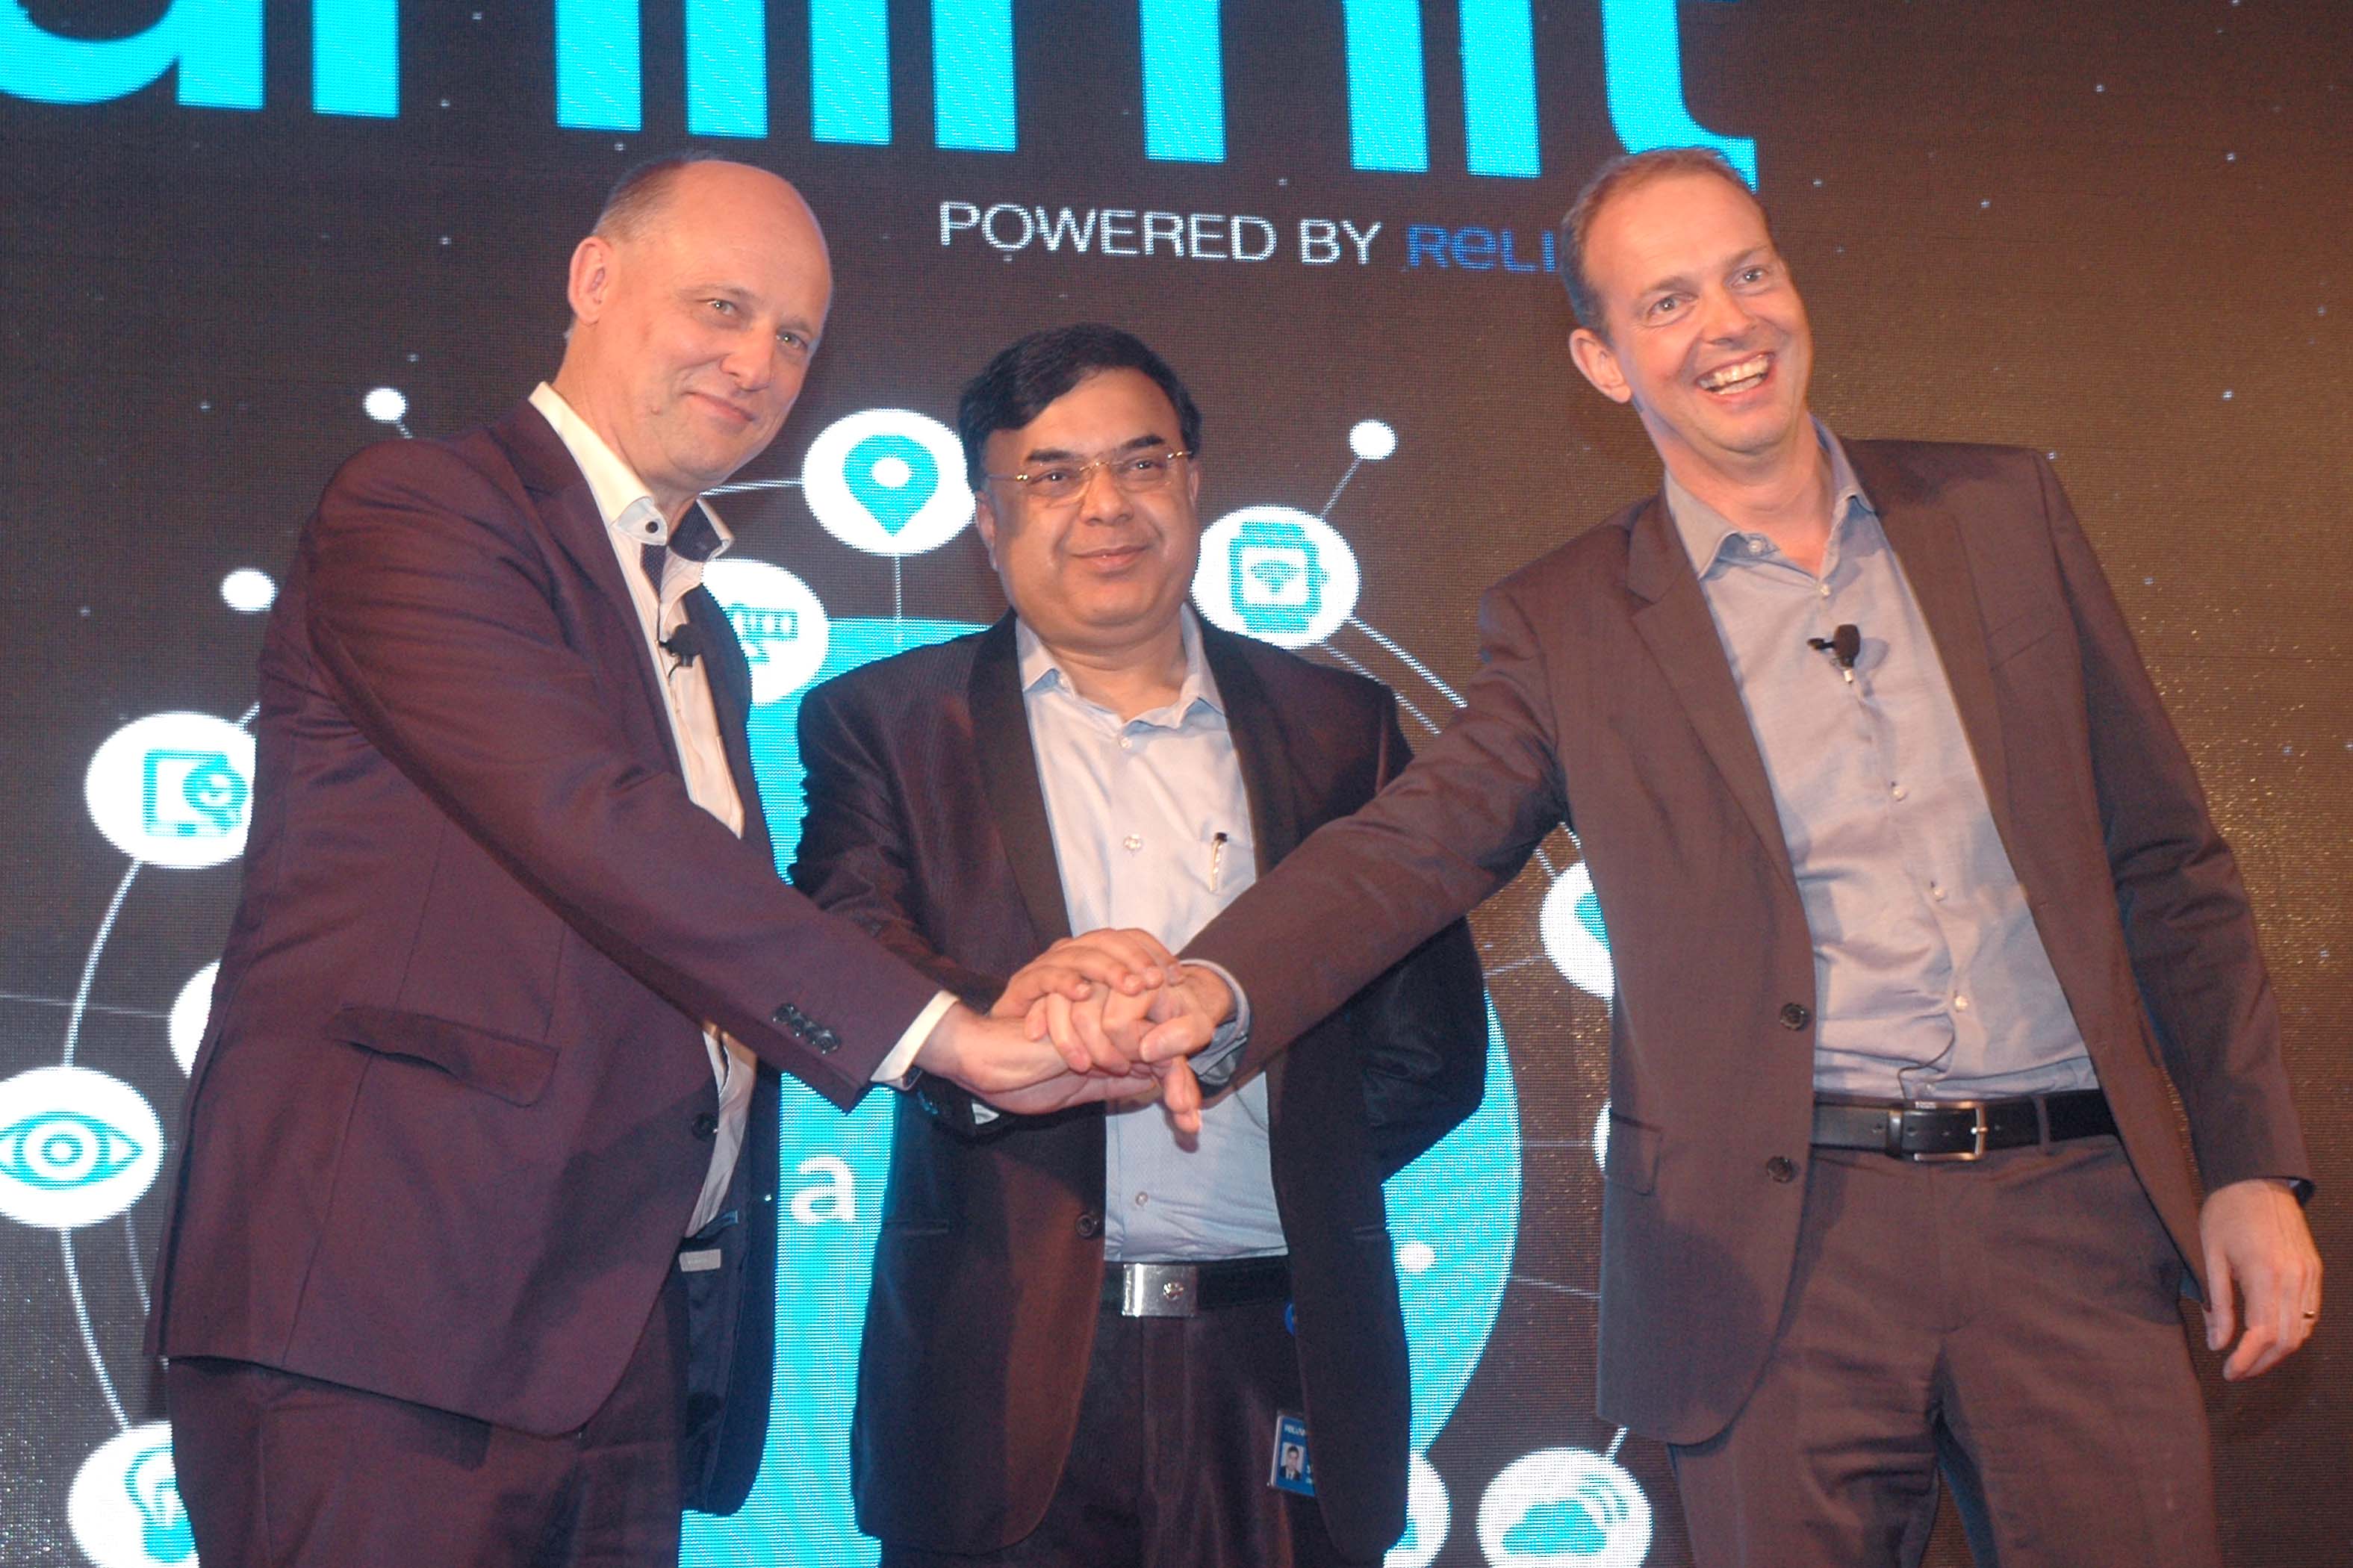 Mumbai (GPN) : (from left) Juergen Hase, CEO of Unlimit, Alok Srivastava, President of Group IT & Innovation, Reliance Group and Bernd Gross, CEO of Cumulocity during the launch of 'Enablement', IoT (Internet of Things) application platform by Reliance Groups Unlimit in partnership with Cumulocity in Mumbai on Thursday. 06.04.2017 at the ITC Grand Central,Parel, Mumbai - Photo By Sachin Murdeshwar GPN NETWORK. 